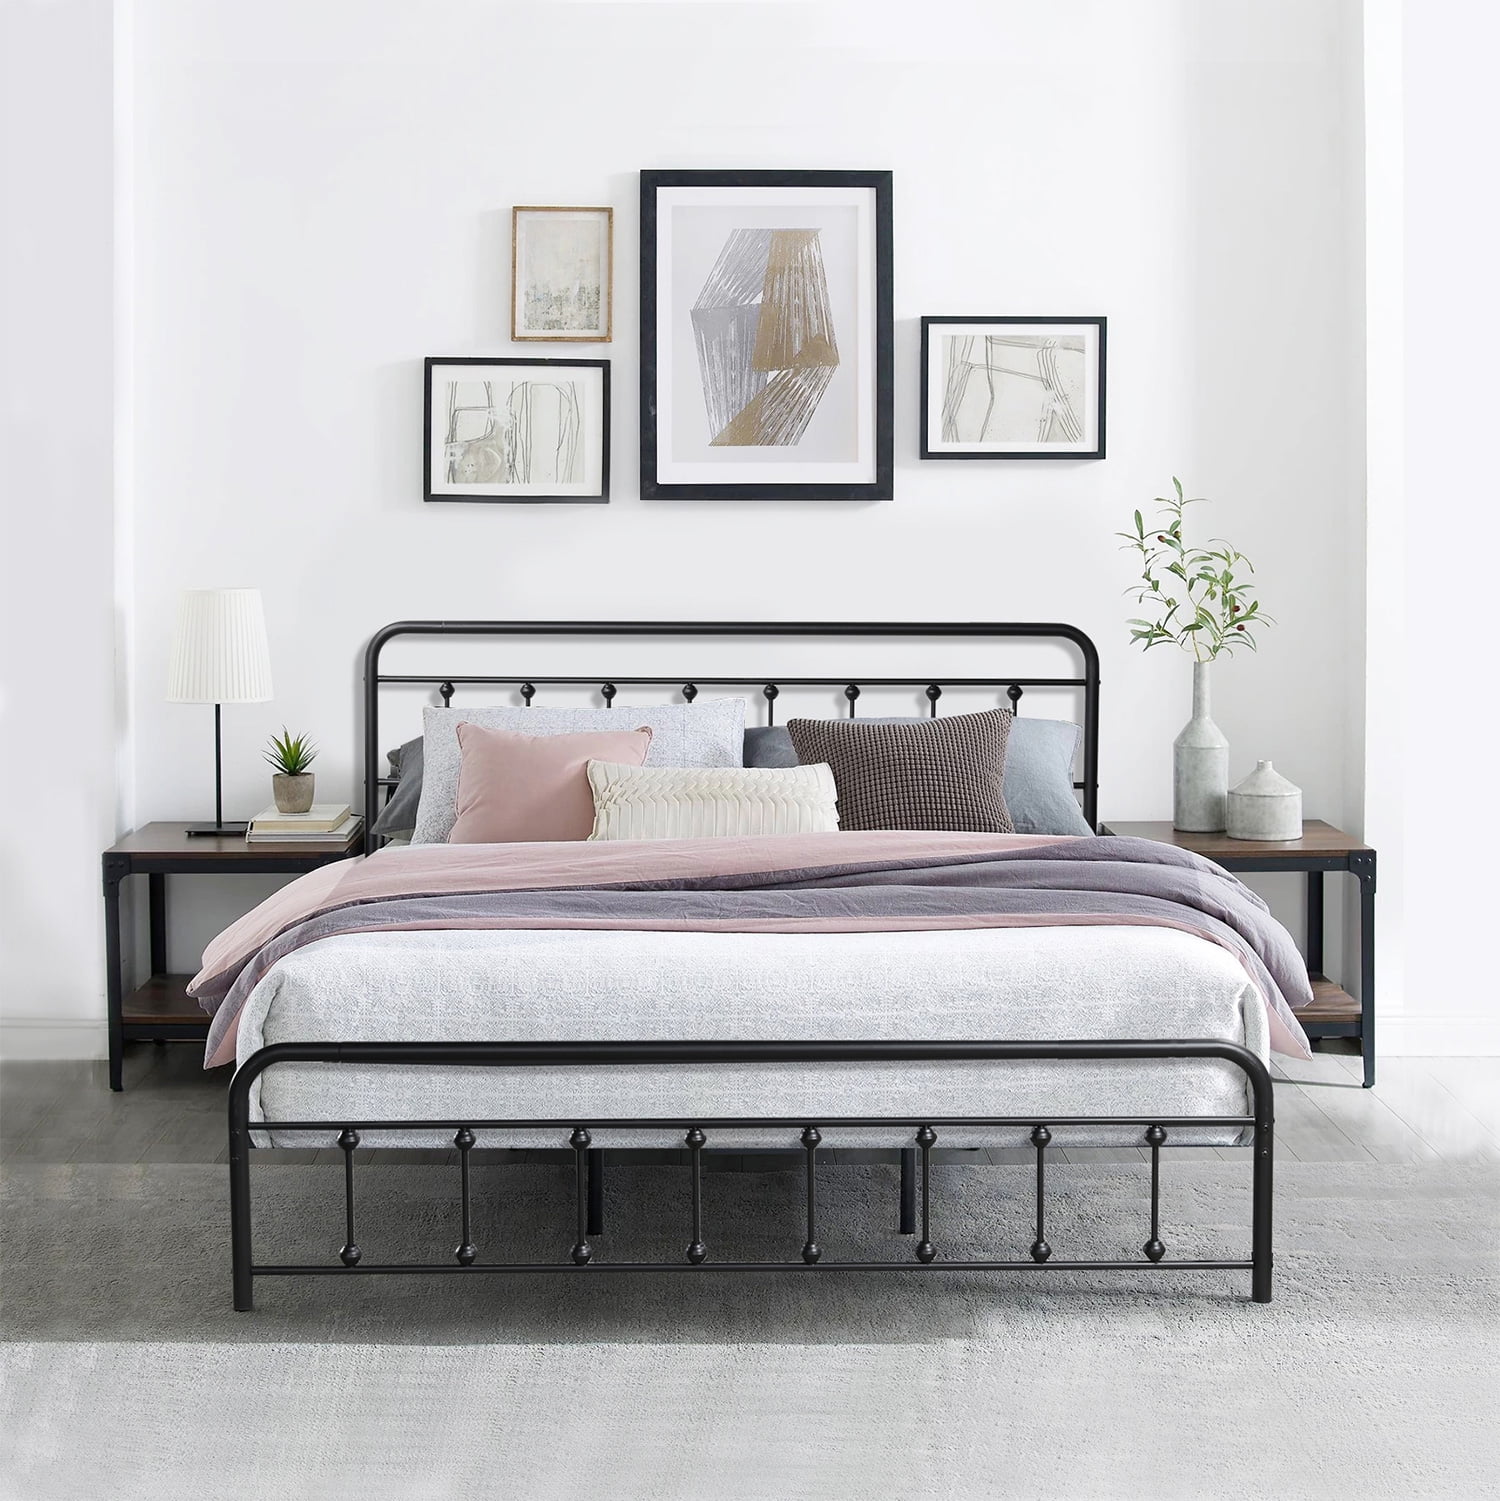 VECELO Vintage Metal Queen Size Platform Bed Frame with Headboard and